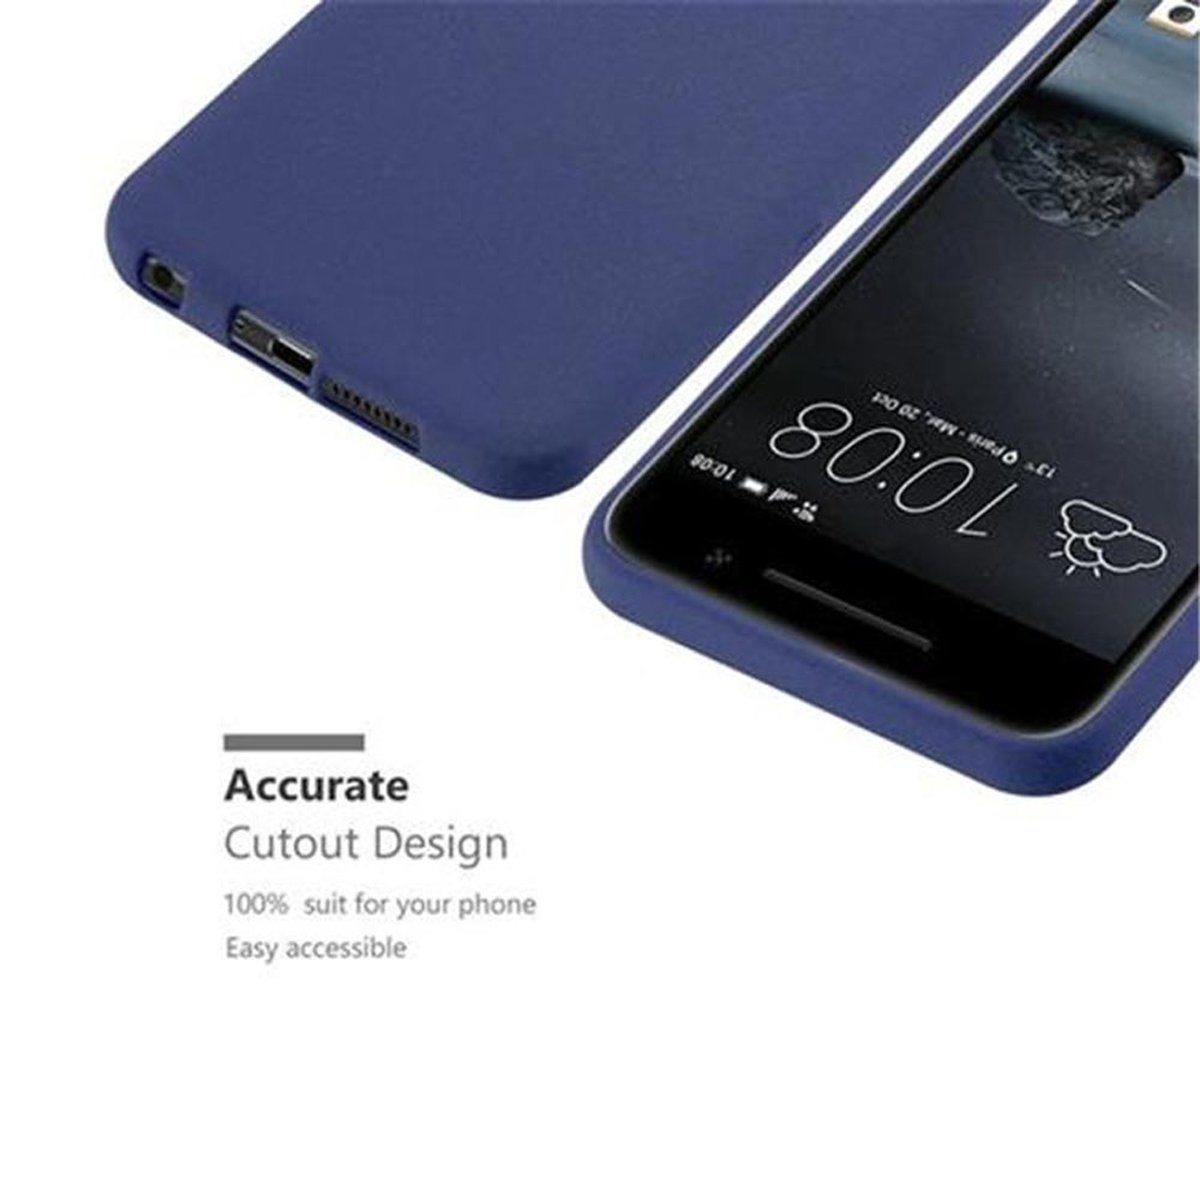 CADORABO TPU FROST A9, HTC, Schutzhülle, BLAU DUNKEL Frosted Backcover, ONE